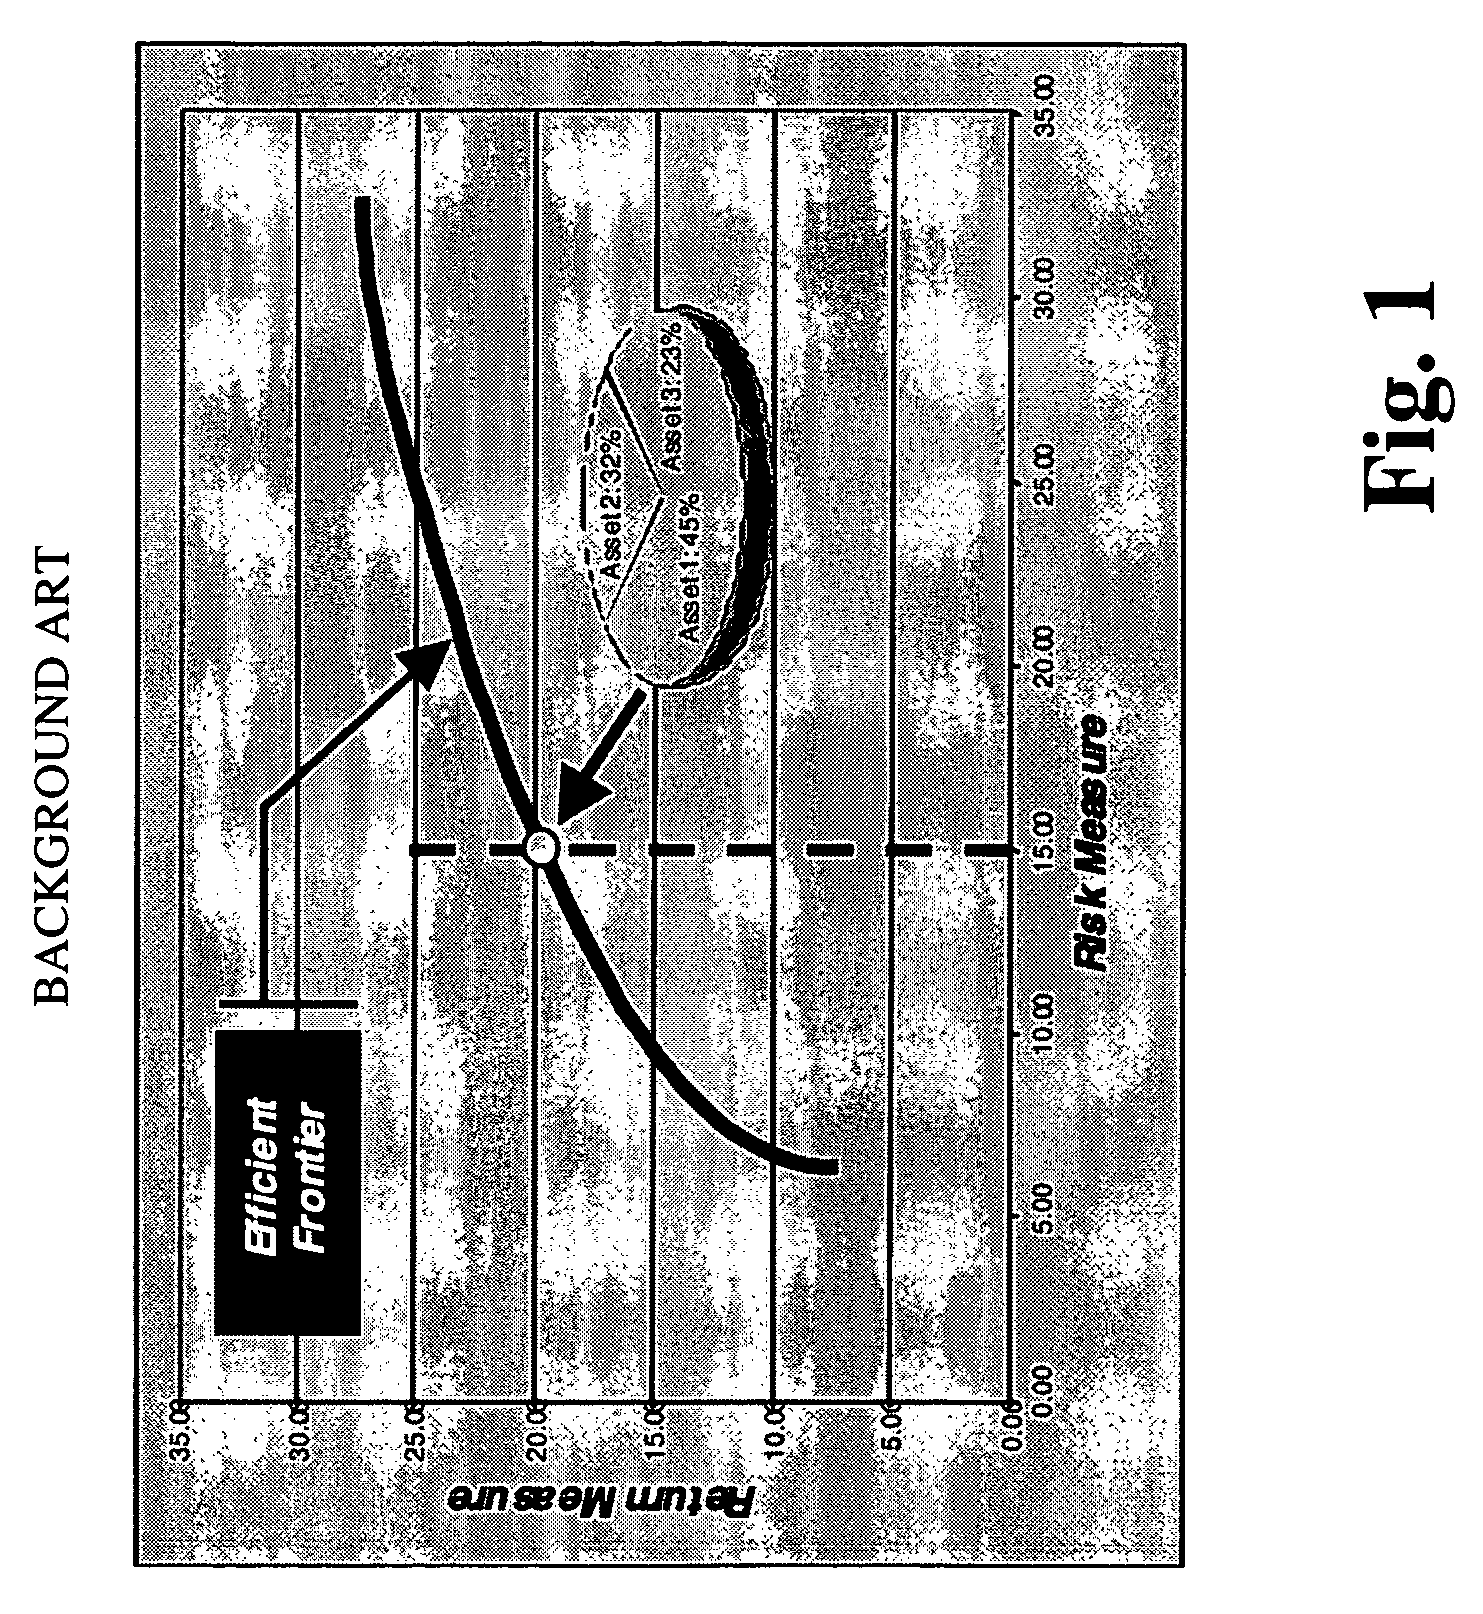 Systems and methods for multi-objective portfolio optimization